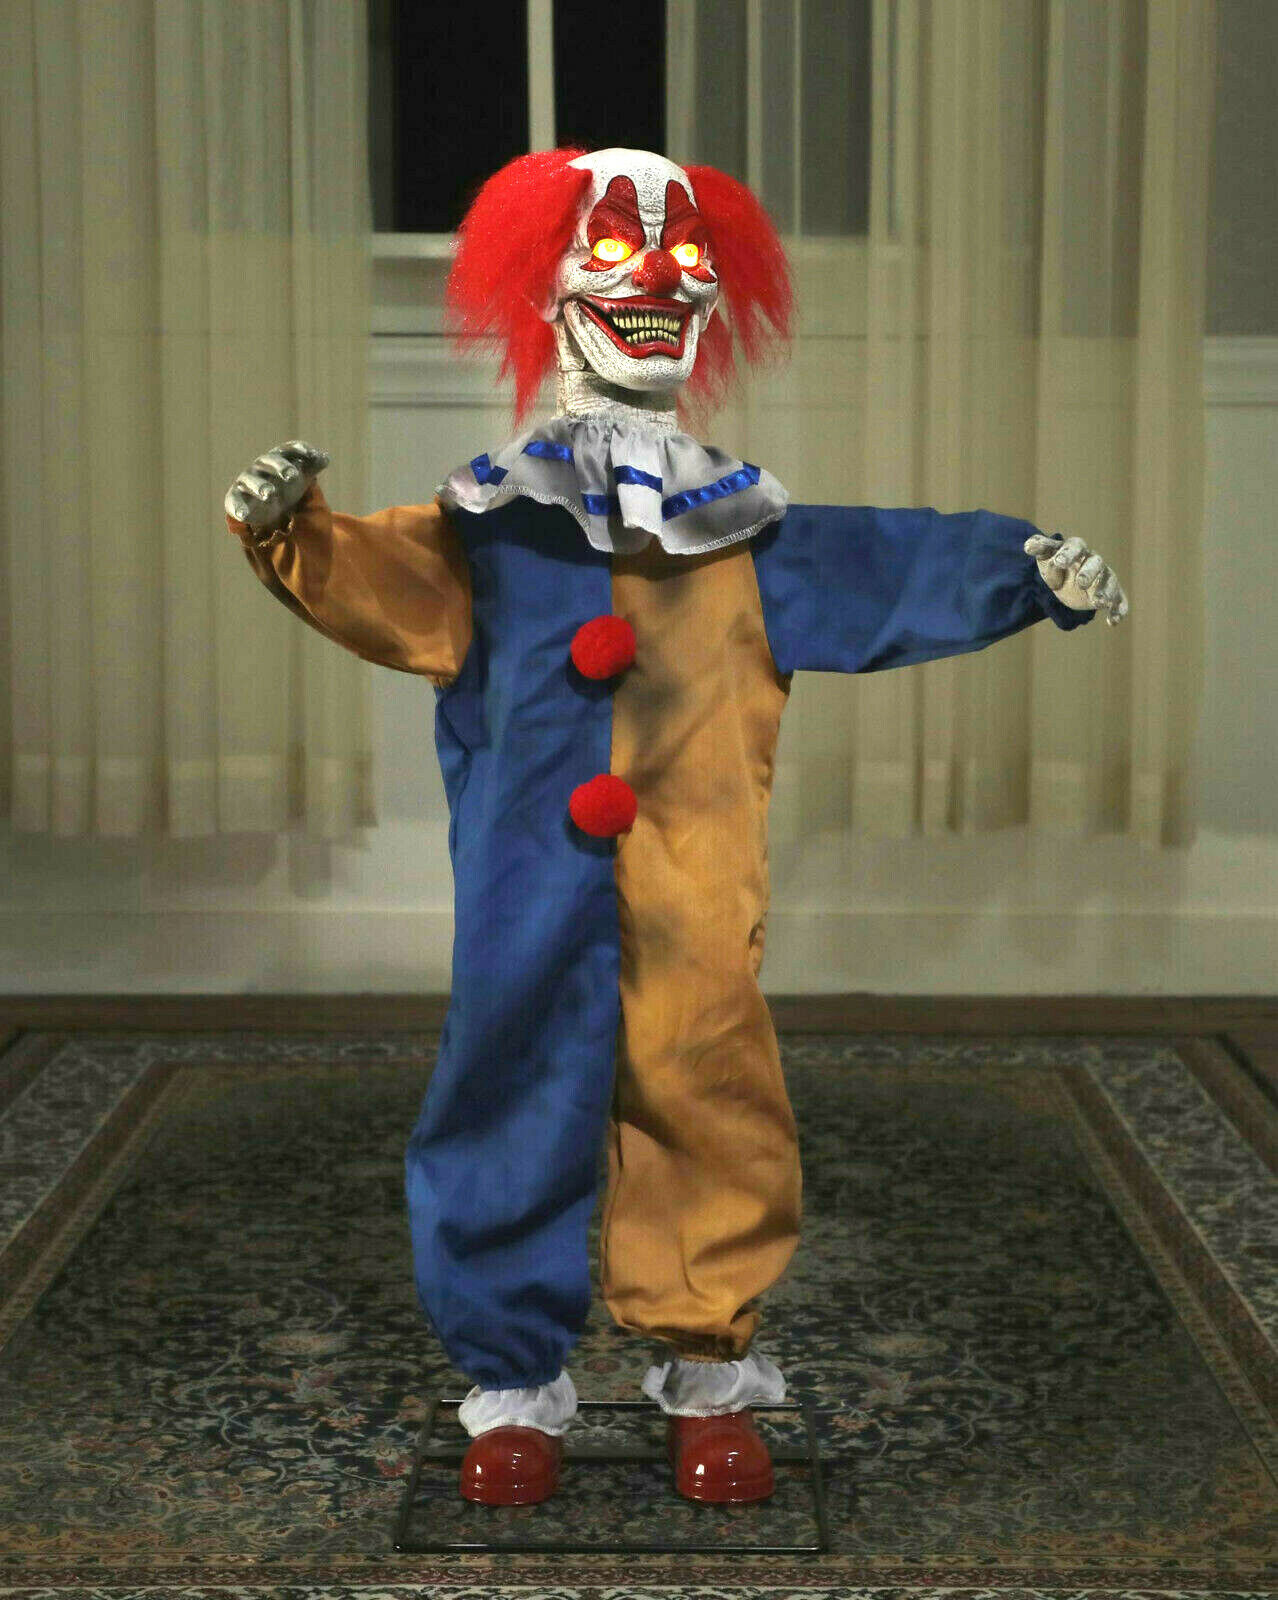 HALLOWEEN 3 FT ANIMATED LITTLE TOP CLOWN EVIL PROP HAUNTED HOUSE HORROR